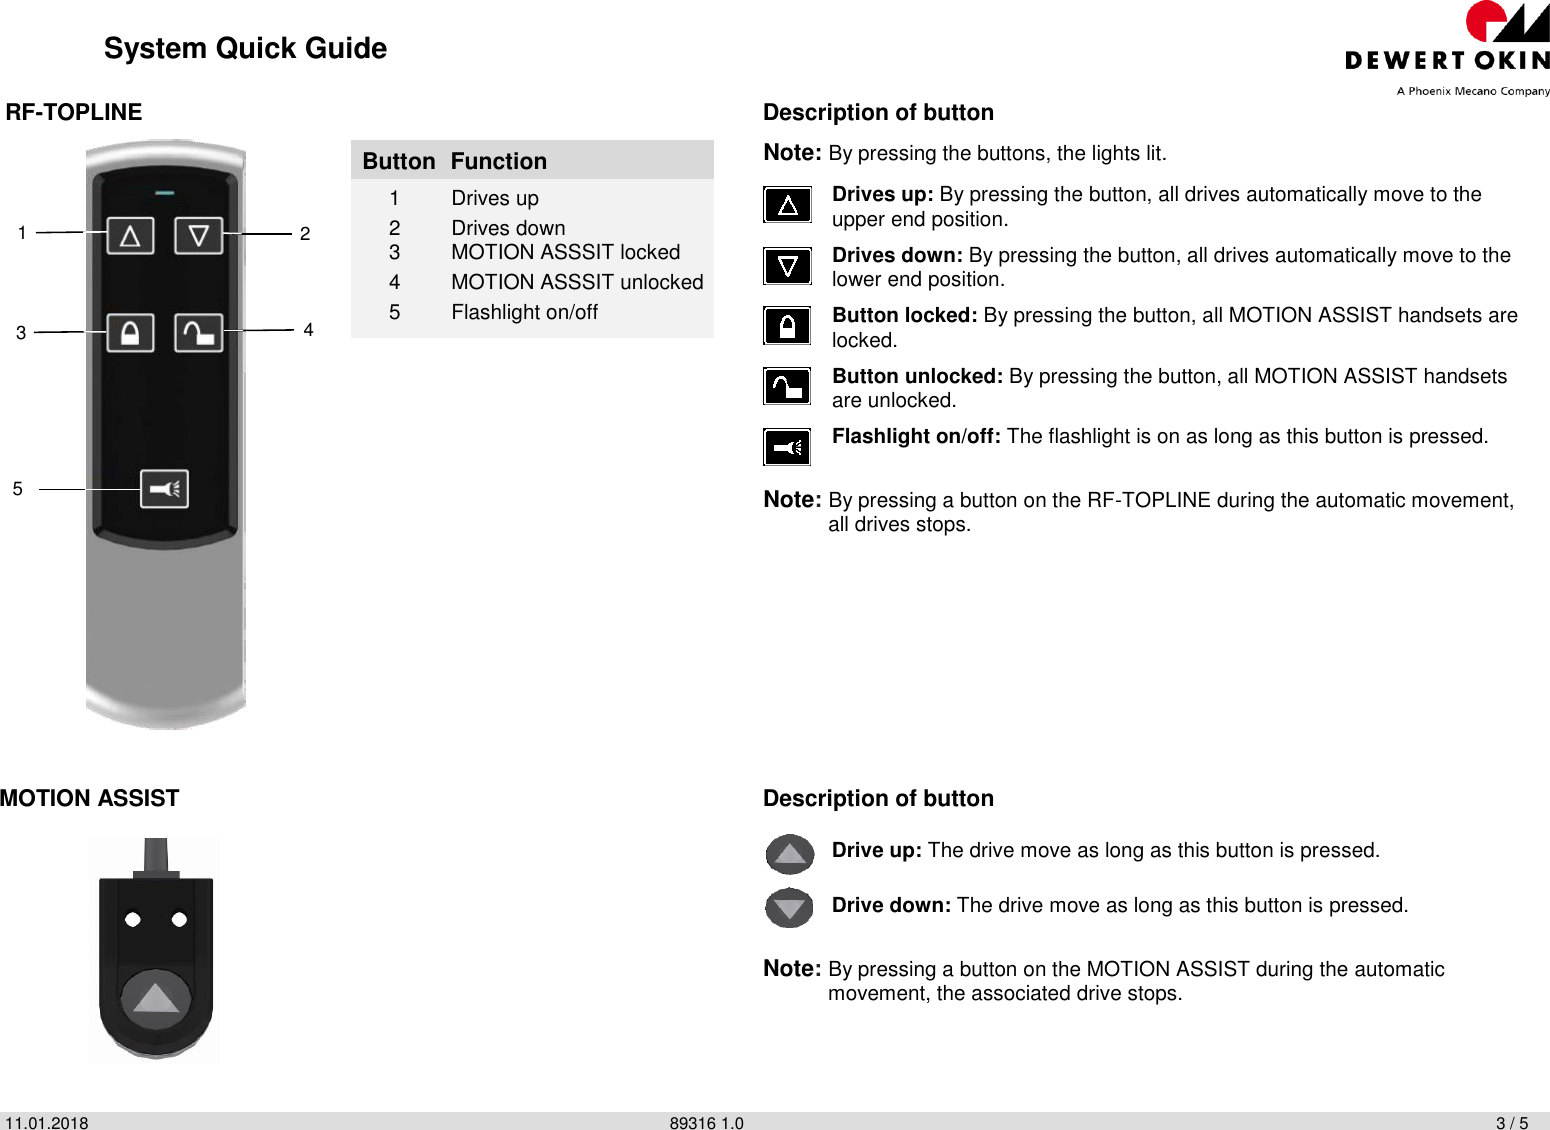  System Quick Guide 11.01.2018                89316 1.0                       3 / 5  RF-TOPLINE                    Description of button  Button  Function  Note: By pressing the buttons, the lights lit. Drives up: By pressing the button, all drives automatically move to the upper end position. Drives down: By pressing the button, all drives automatically move to the lower end position. Button locked: By pressing the button, all MOTION ASSIST handsets are locked. Button unlocked: By pressing the button, all MOTION ASSIST handsets are unlocked. Flashlight on/off: The flashlight is on as long as this button is pressed. Note: By pressing a button on the RF-TOPLINE during the automatic movement, all drives stops. 1  Drives up 2  Drives down 3  MOTION ASSSIT locked 4  MOTION ASSSIT unlocked 5  Flashlight on/off  MOTION ASSIST                   Description of button    Drive up: The drive move as long as this button is pressed. Drive down: The drive move as long as this button is pressed. Note: By pressing a button on the MOTION ASSIST during the automatic movement, the associated drive stops. 1 3 5 2 4 